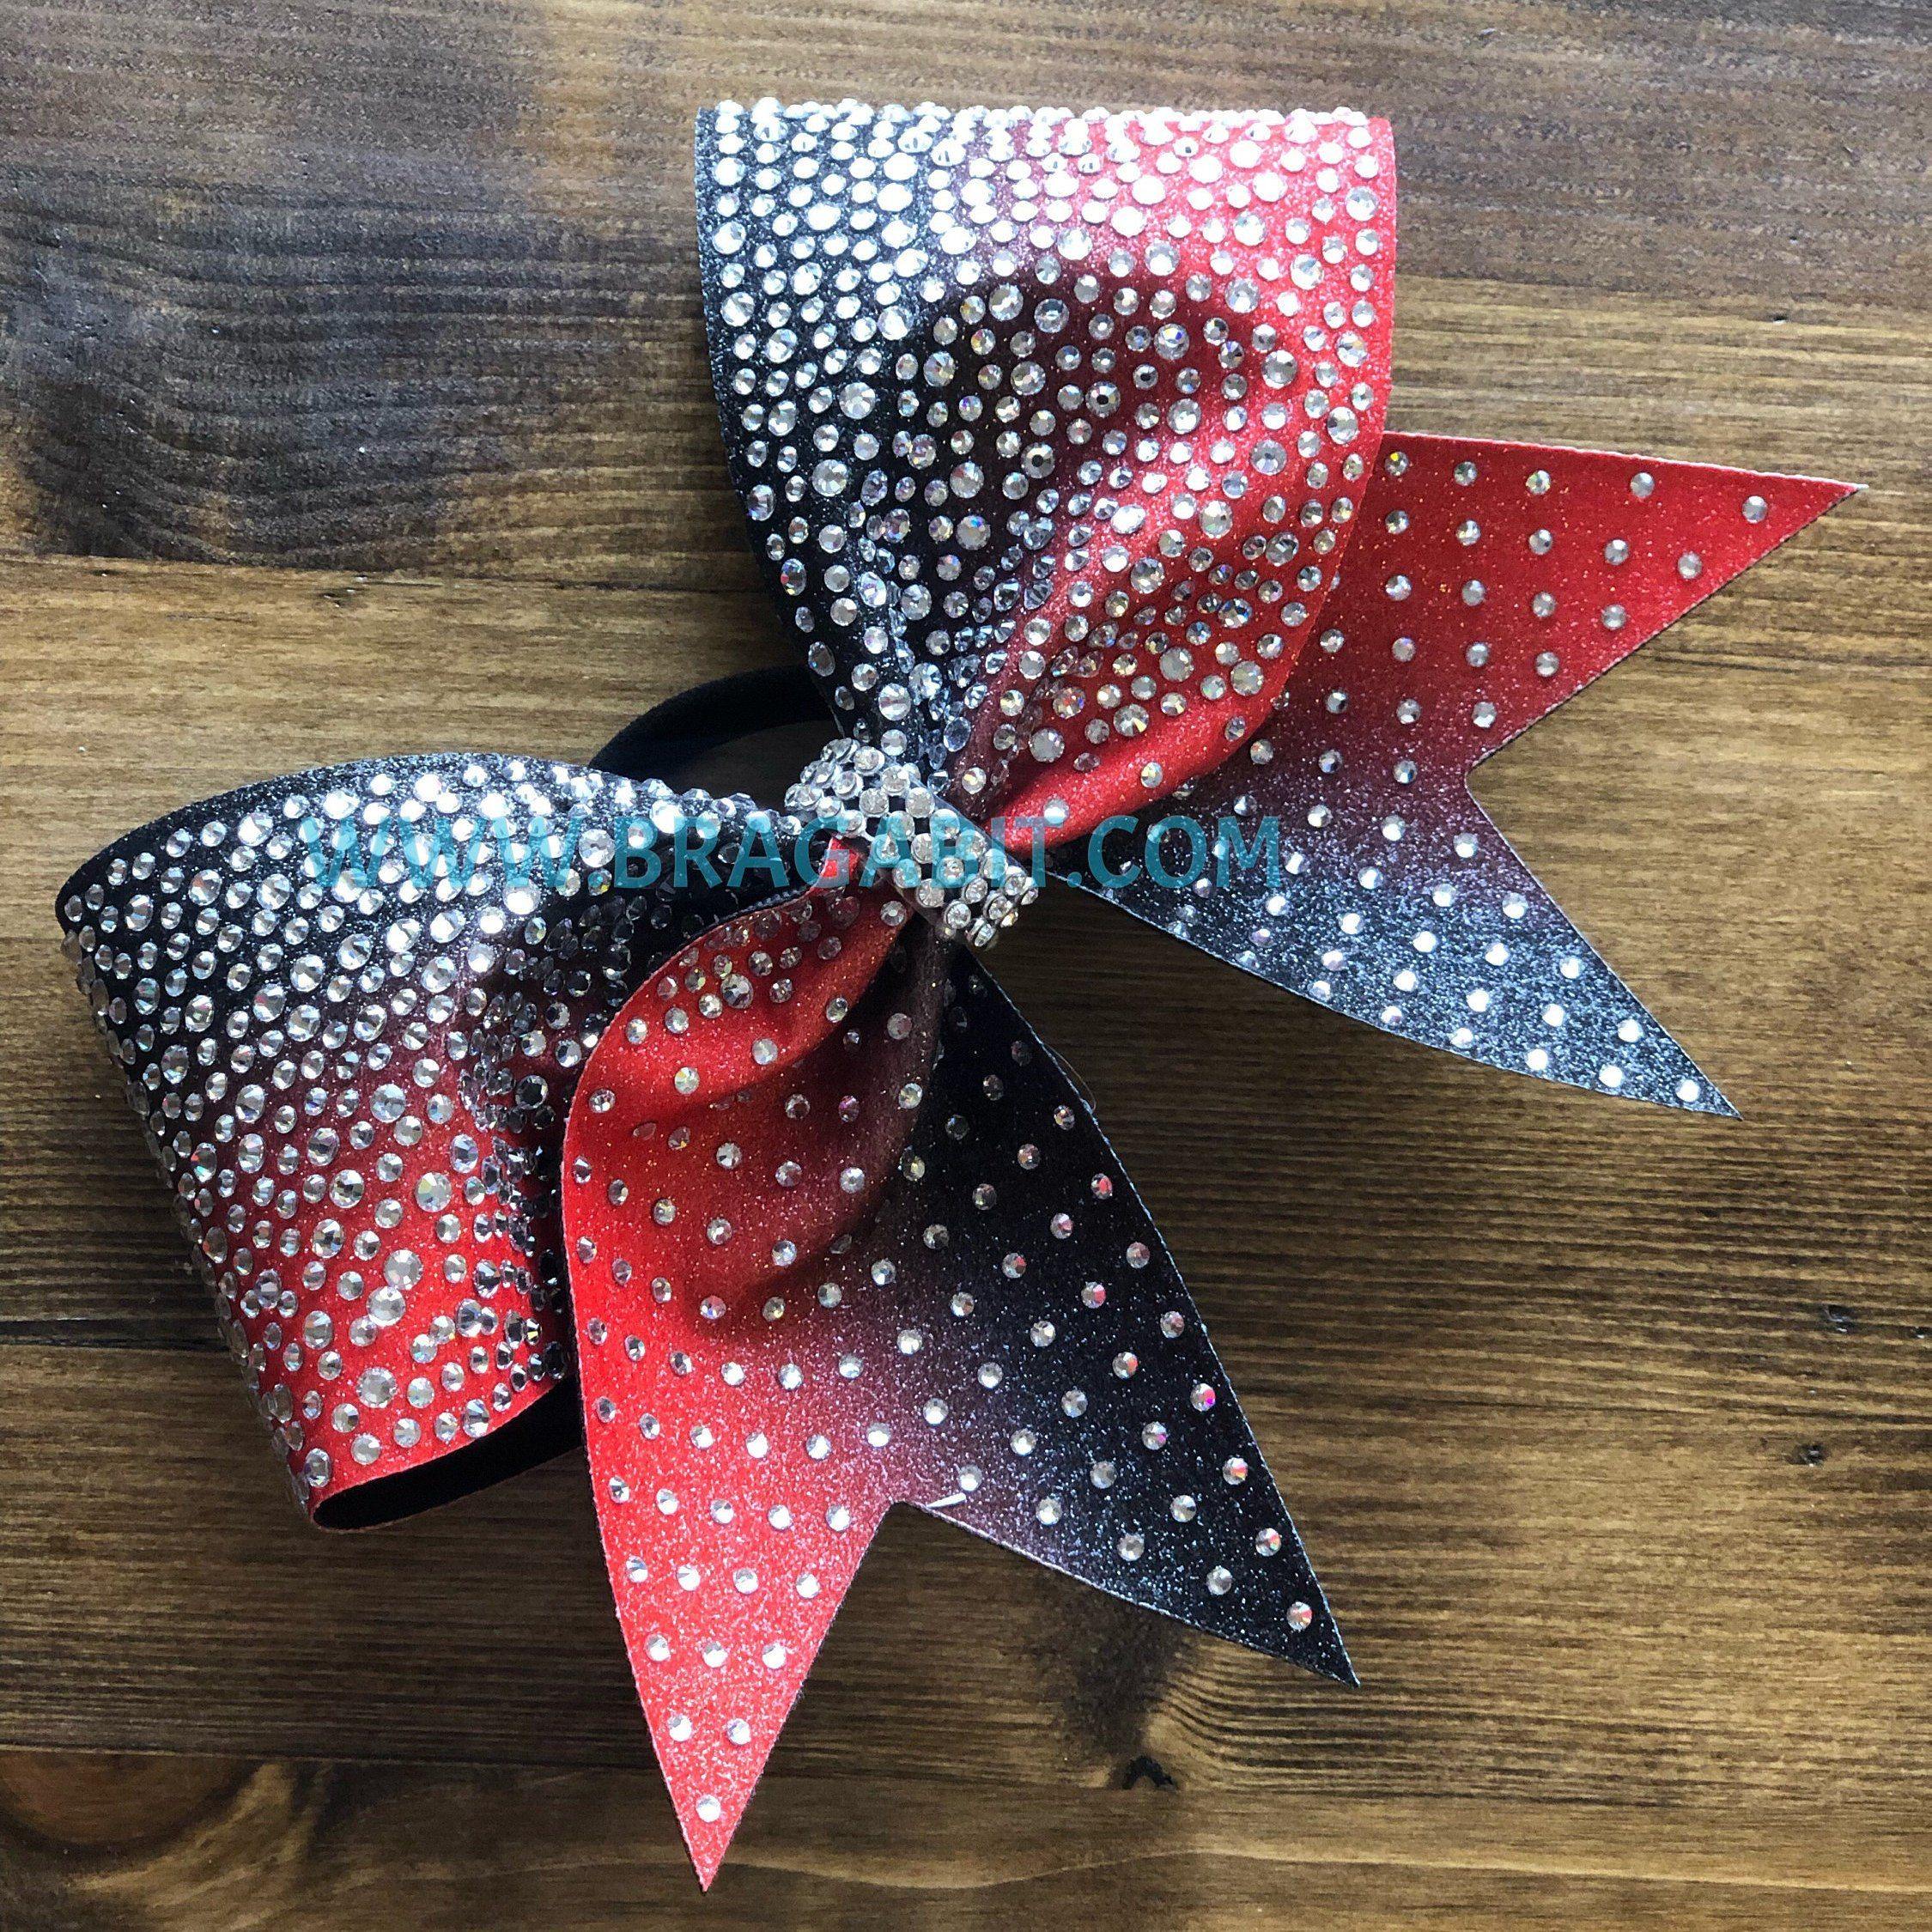 Cheer Bow With Personalized Name and Team Colors. Price Listed is